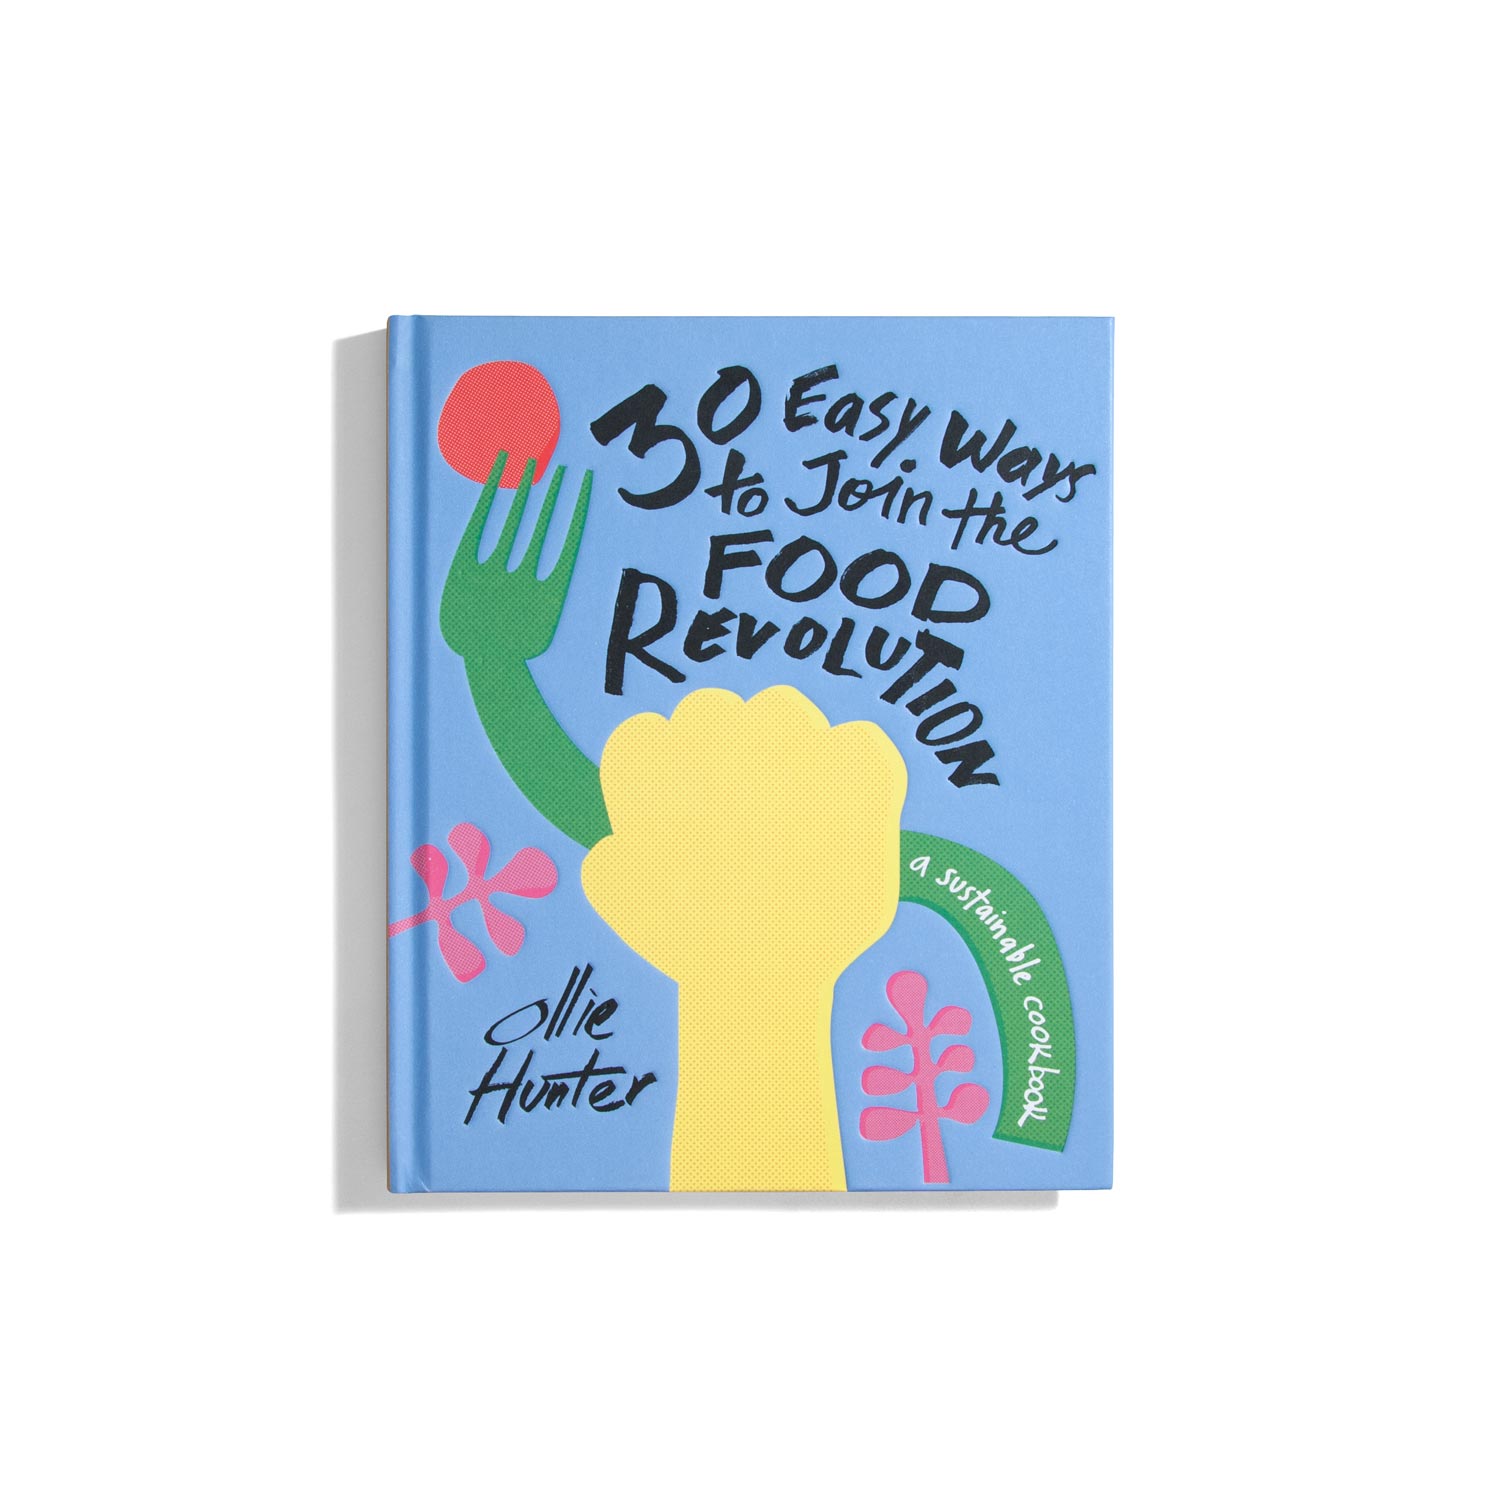 30 Easy Ways to Join the Food Revolution - Ollie Hunter